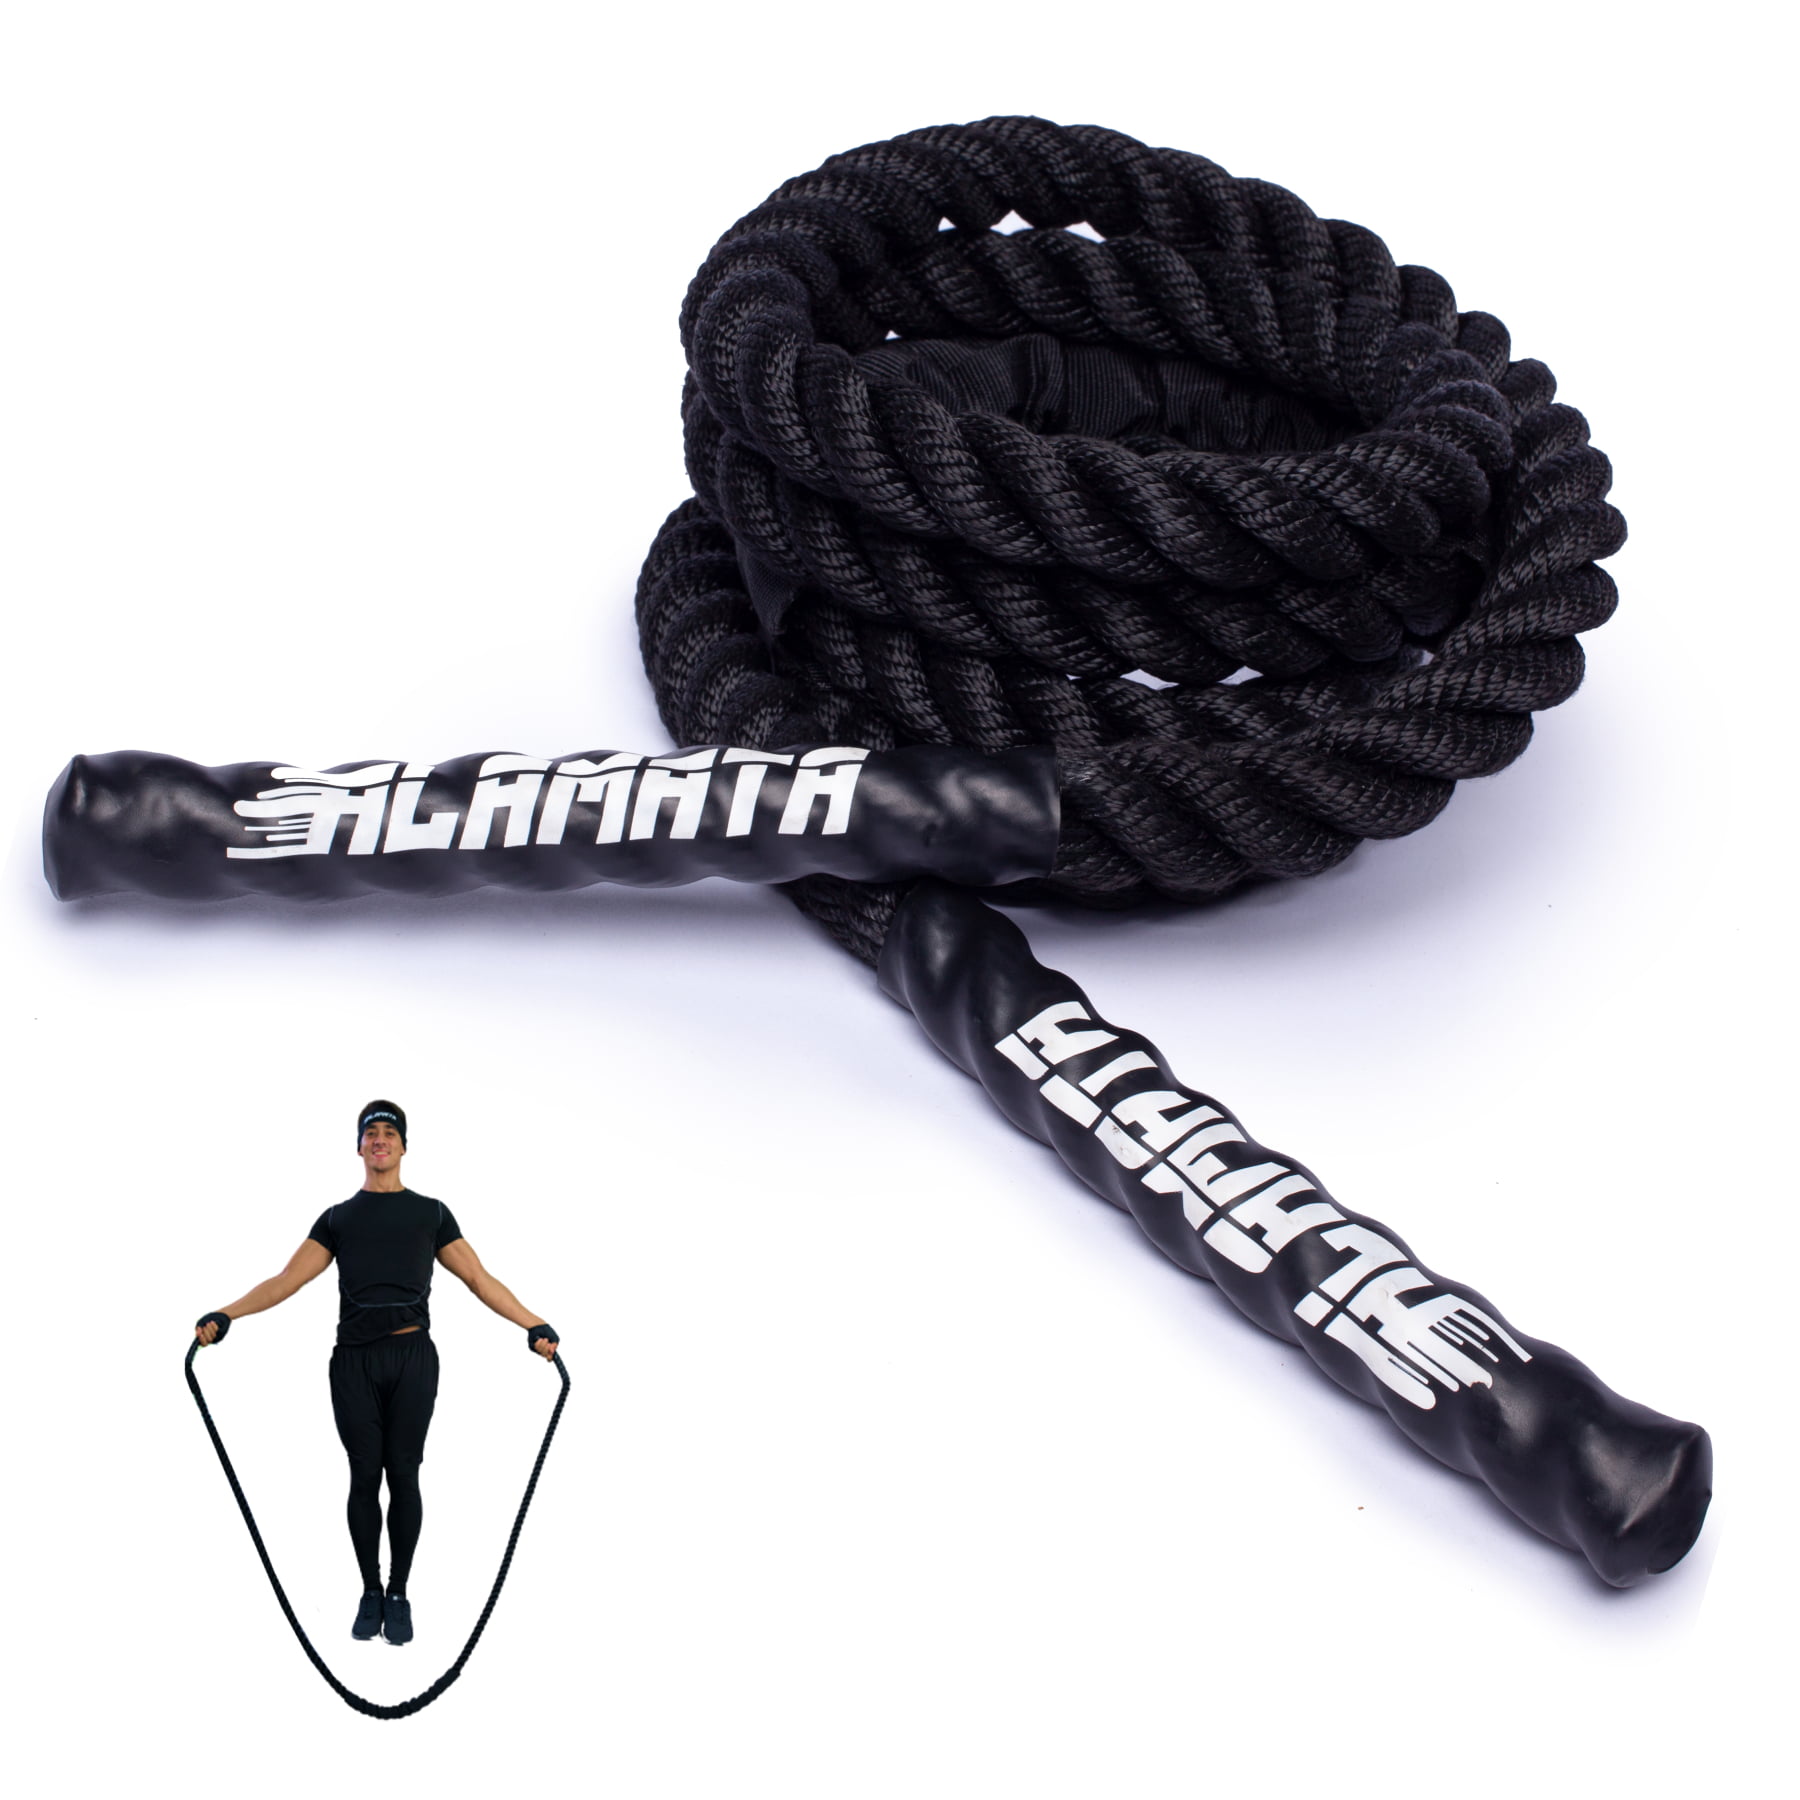 1" x 9.8ft Battle Rope Heavy Duty Workout Strength Exercise Training Rope Black 